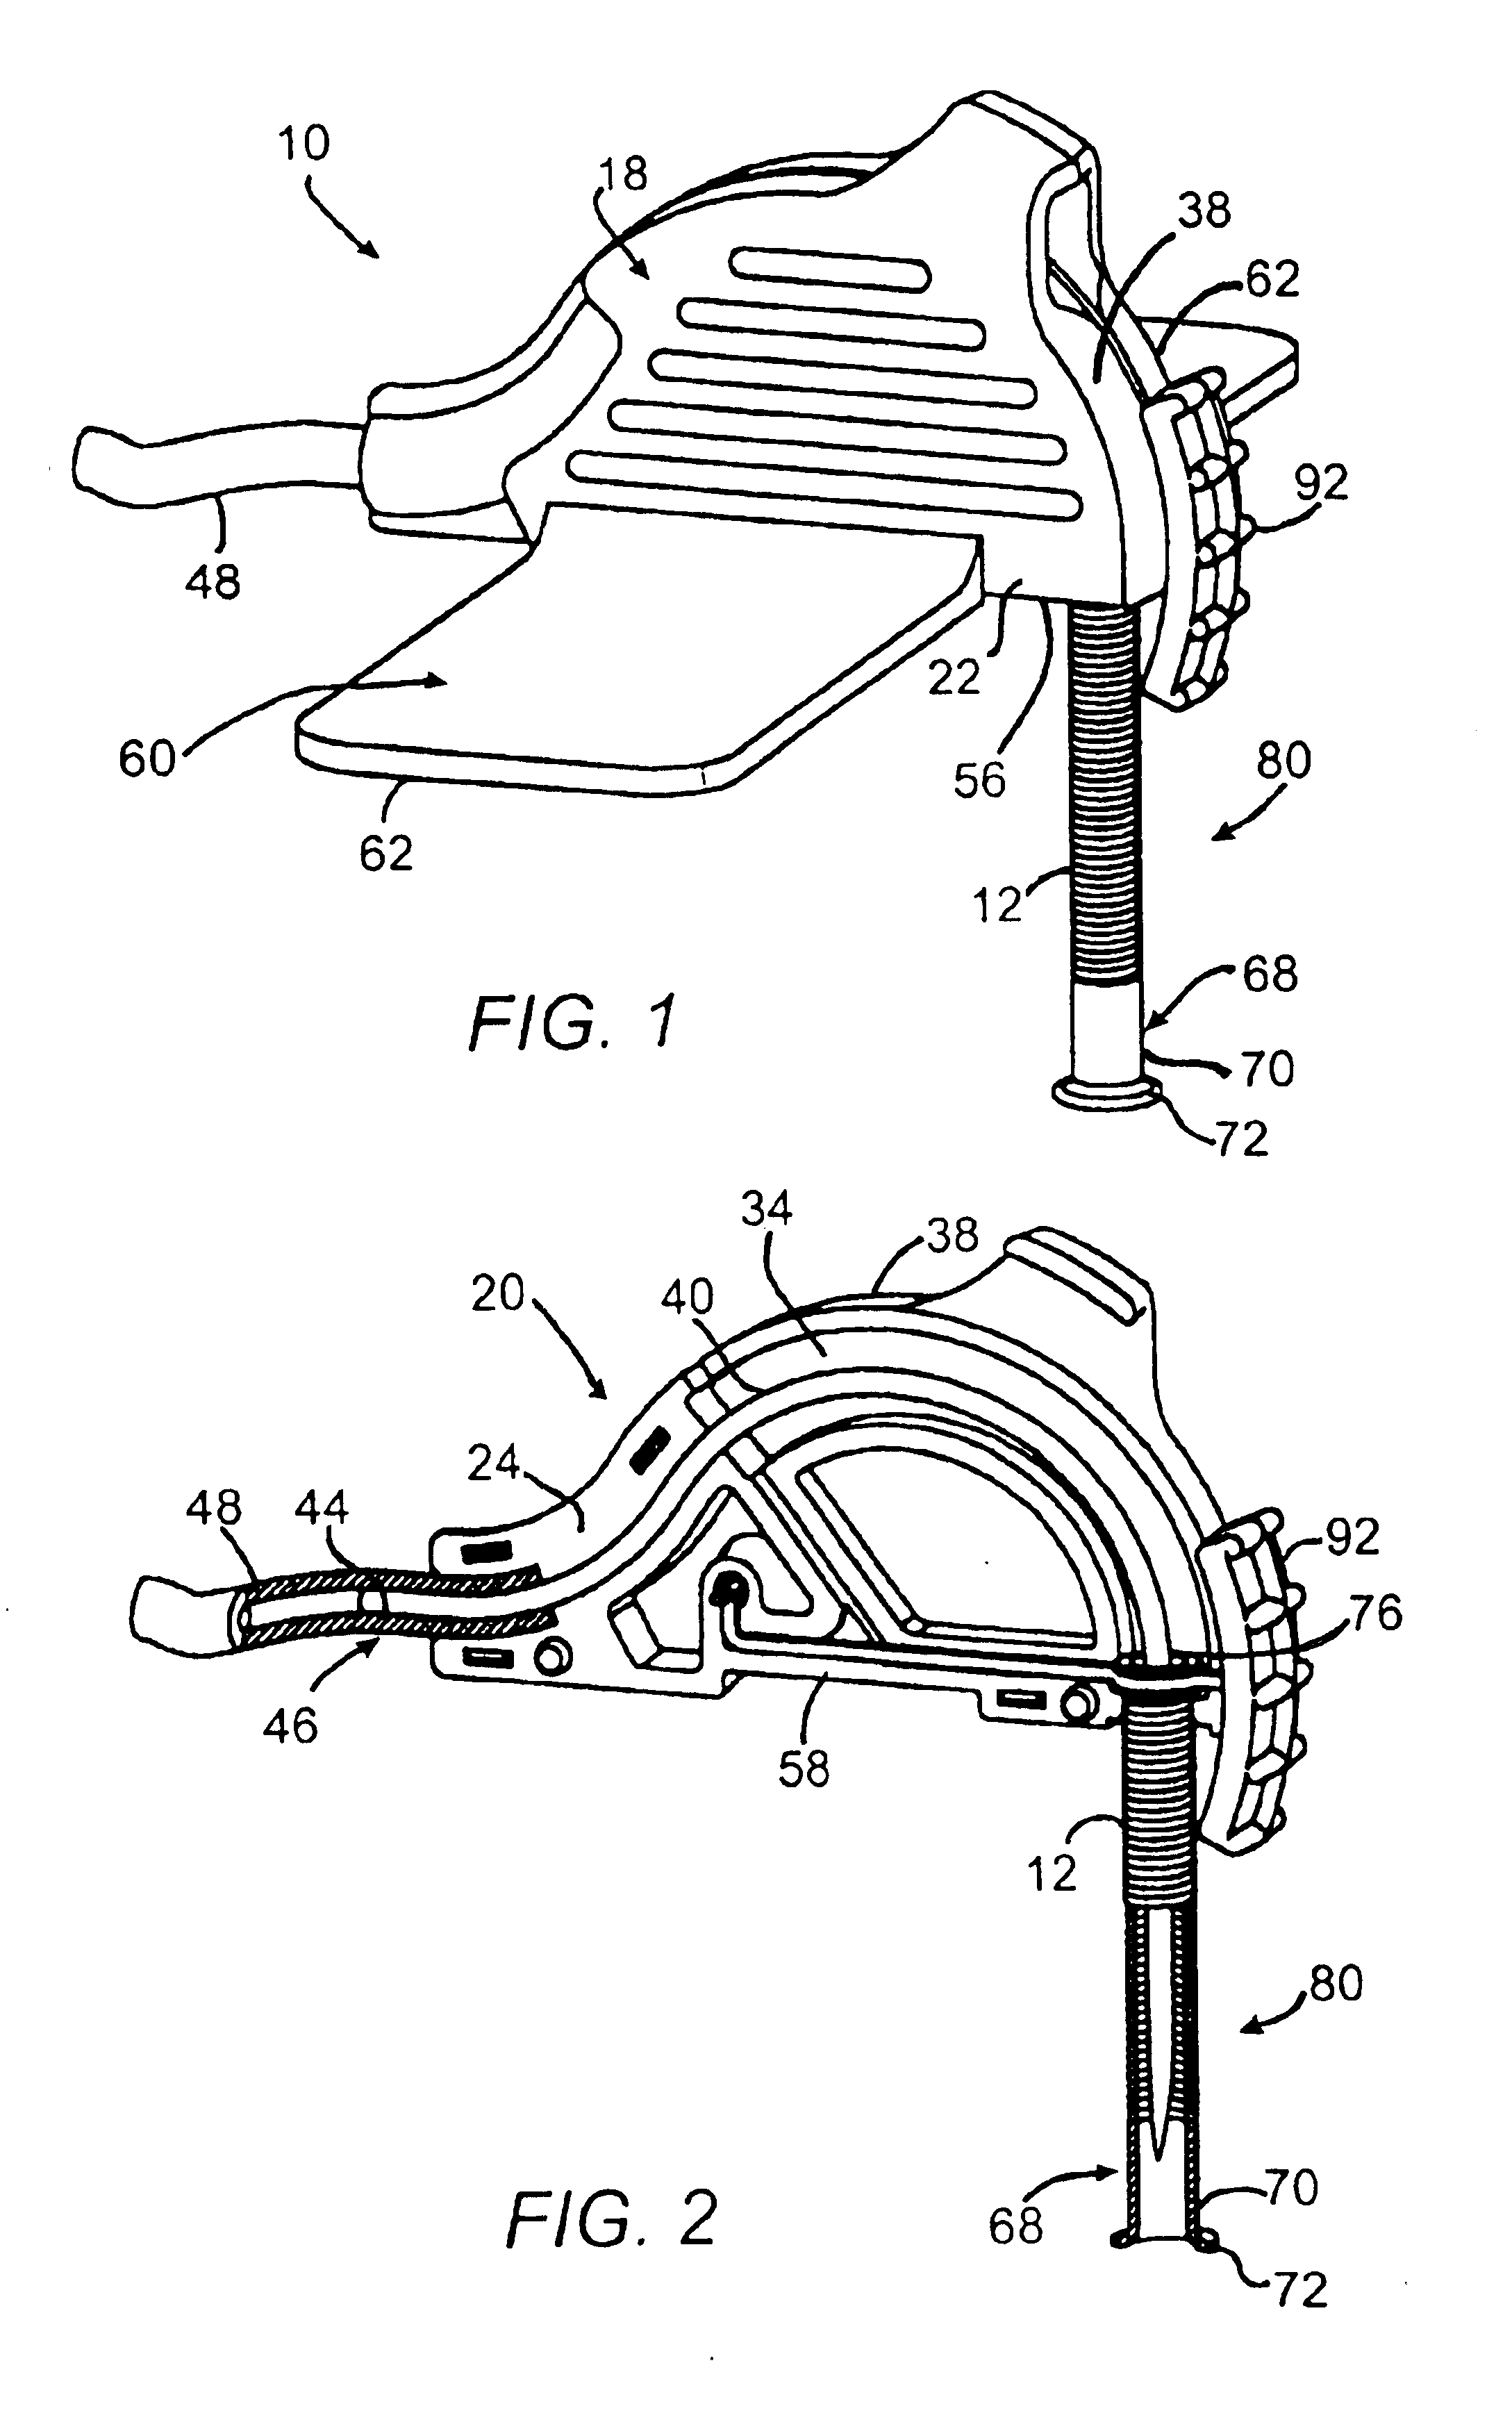 Huber needle with anti-rebound safety mechanism